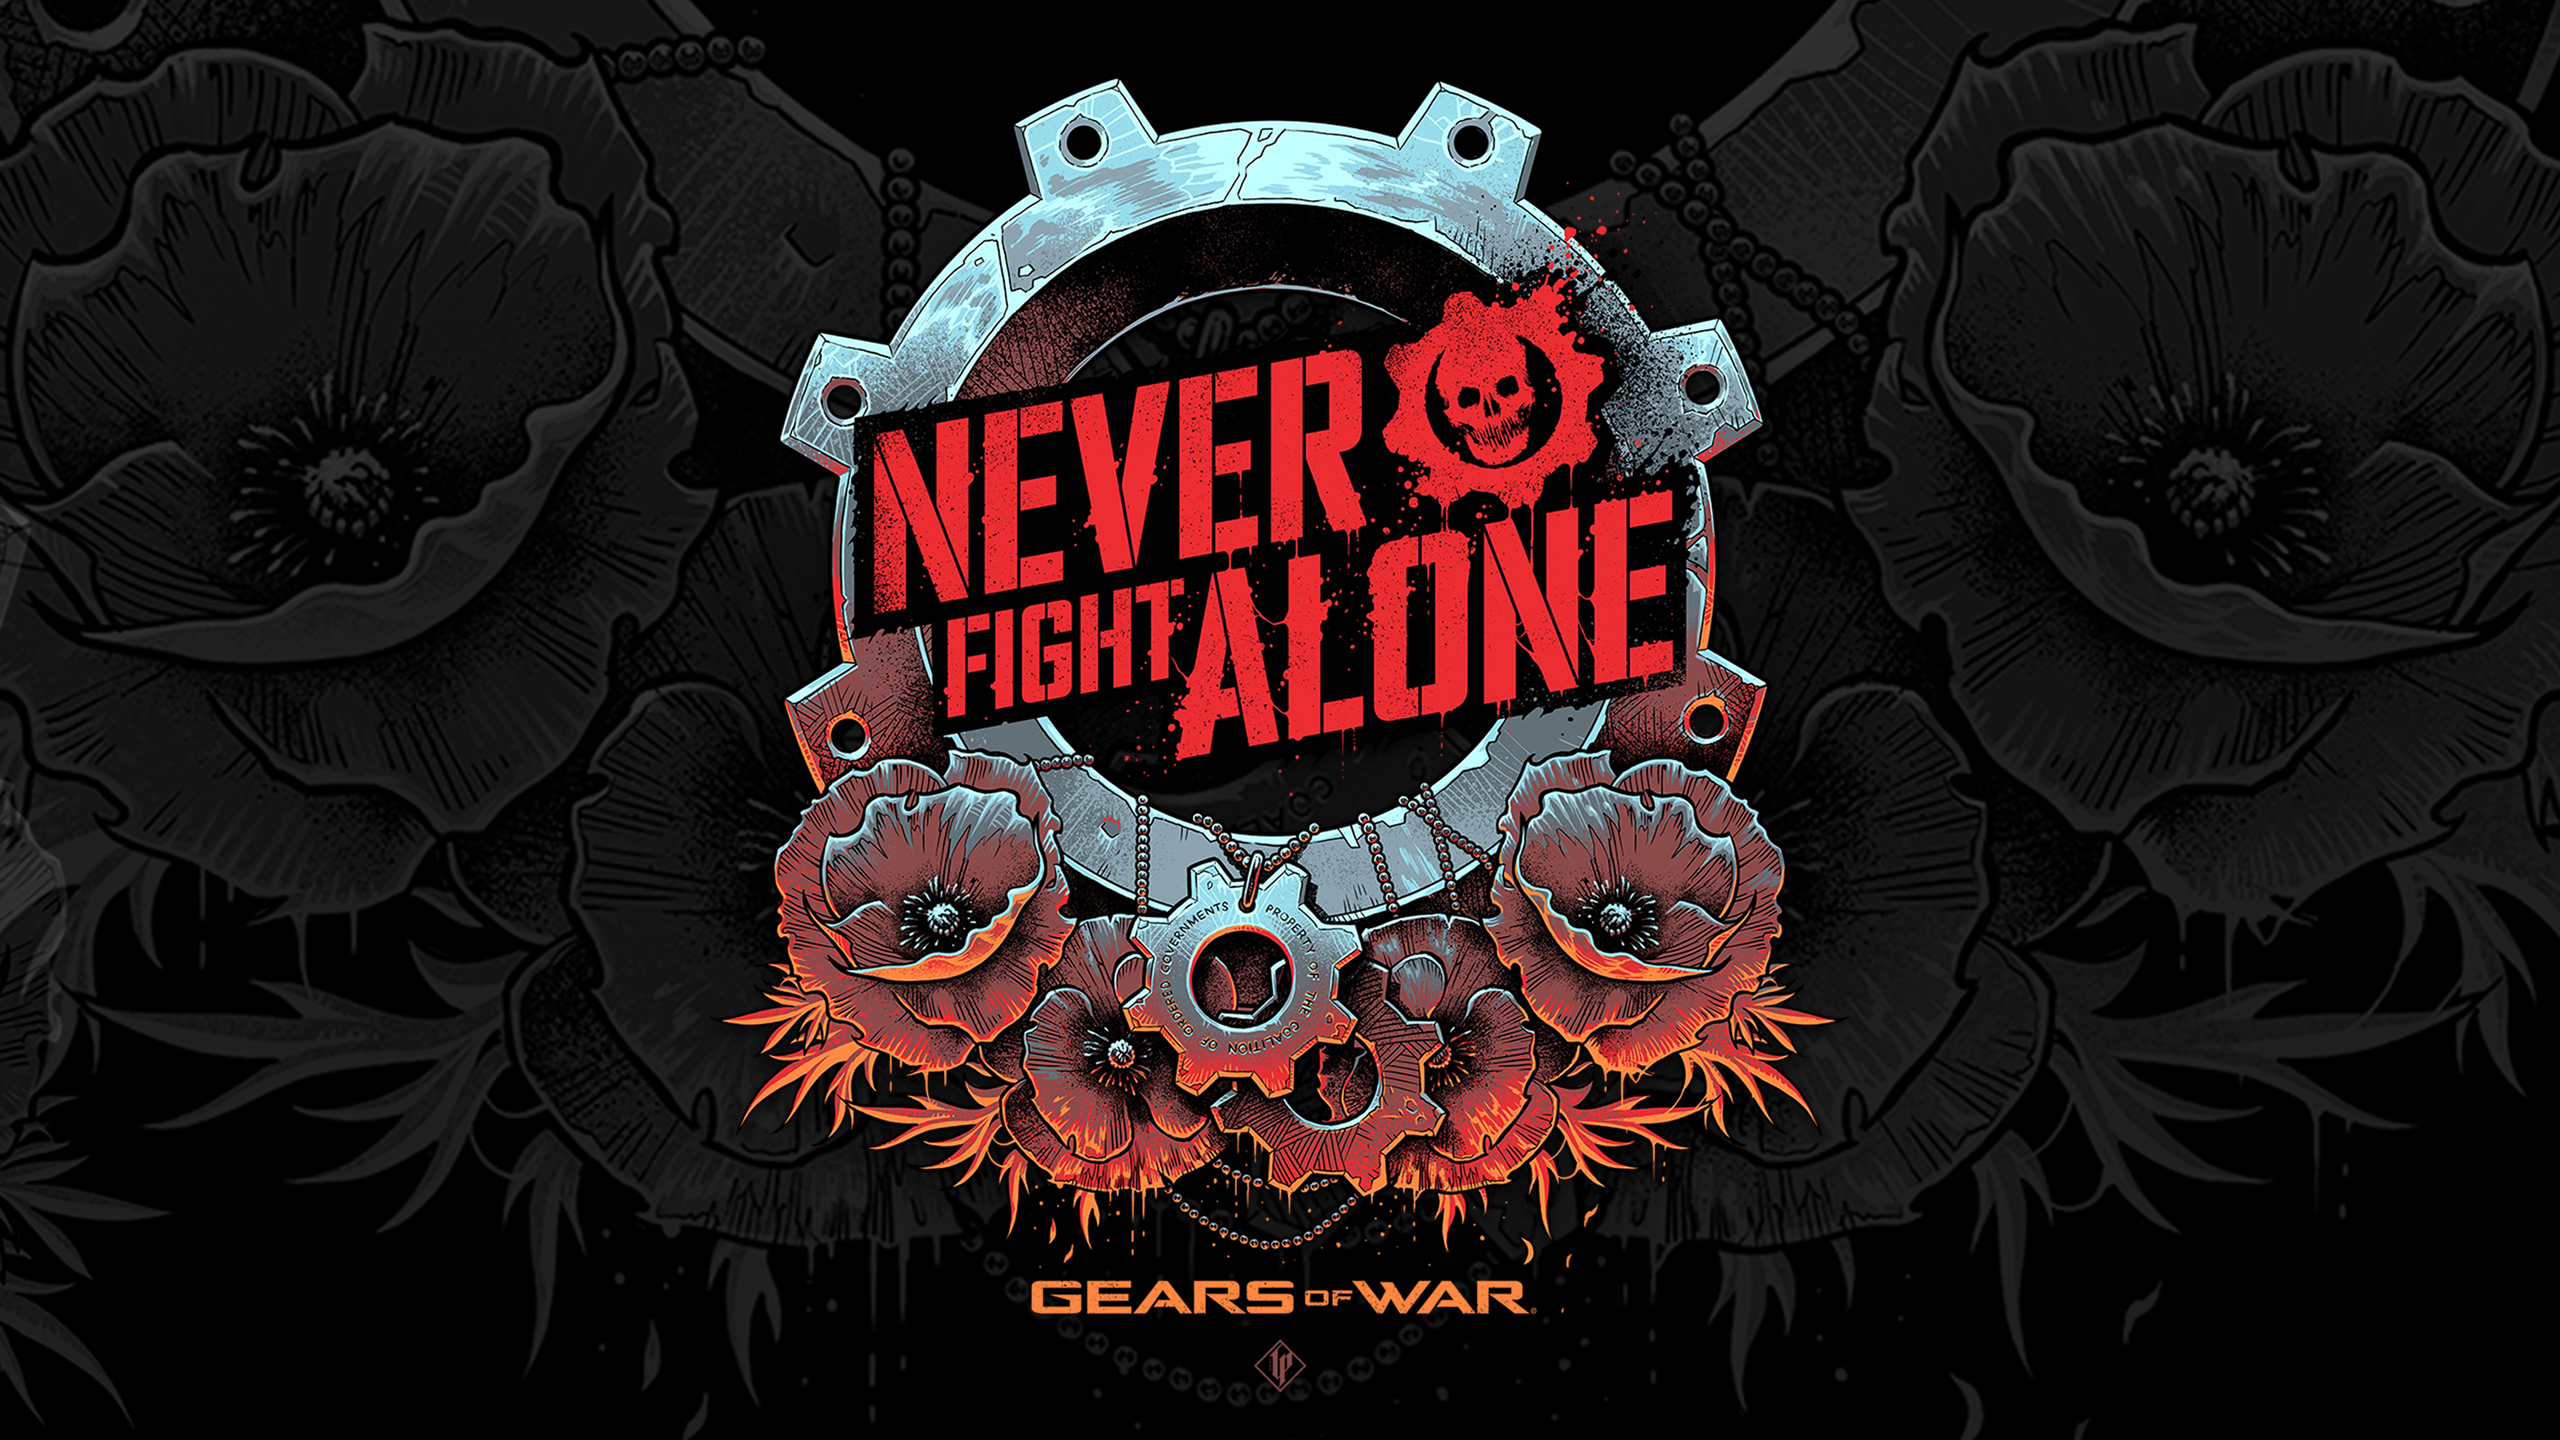 HD Gears Of War desktop wallpaper featuring the slogan 'Never Fight Alone' with a cog and skull emblem on a dark floral background.